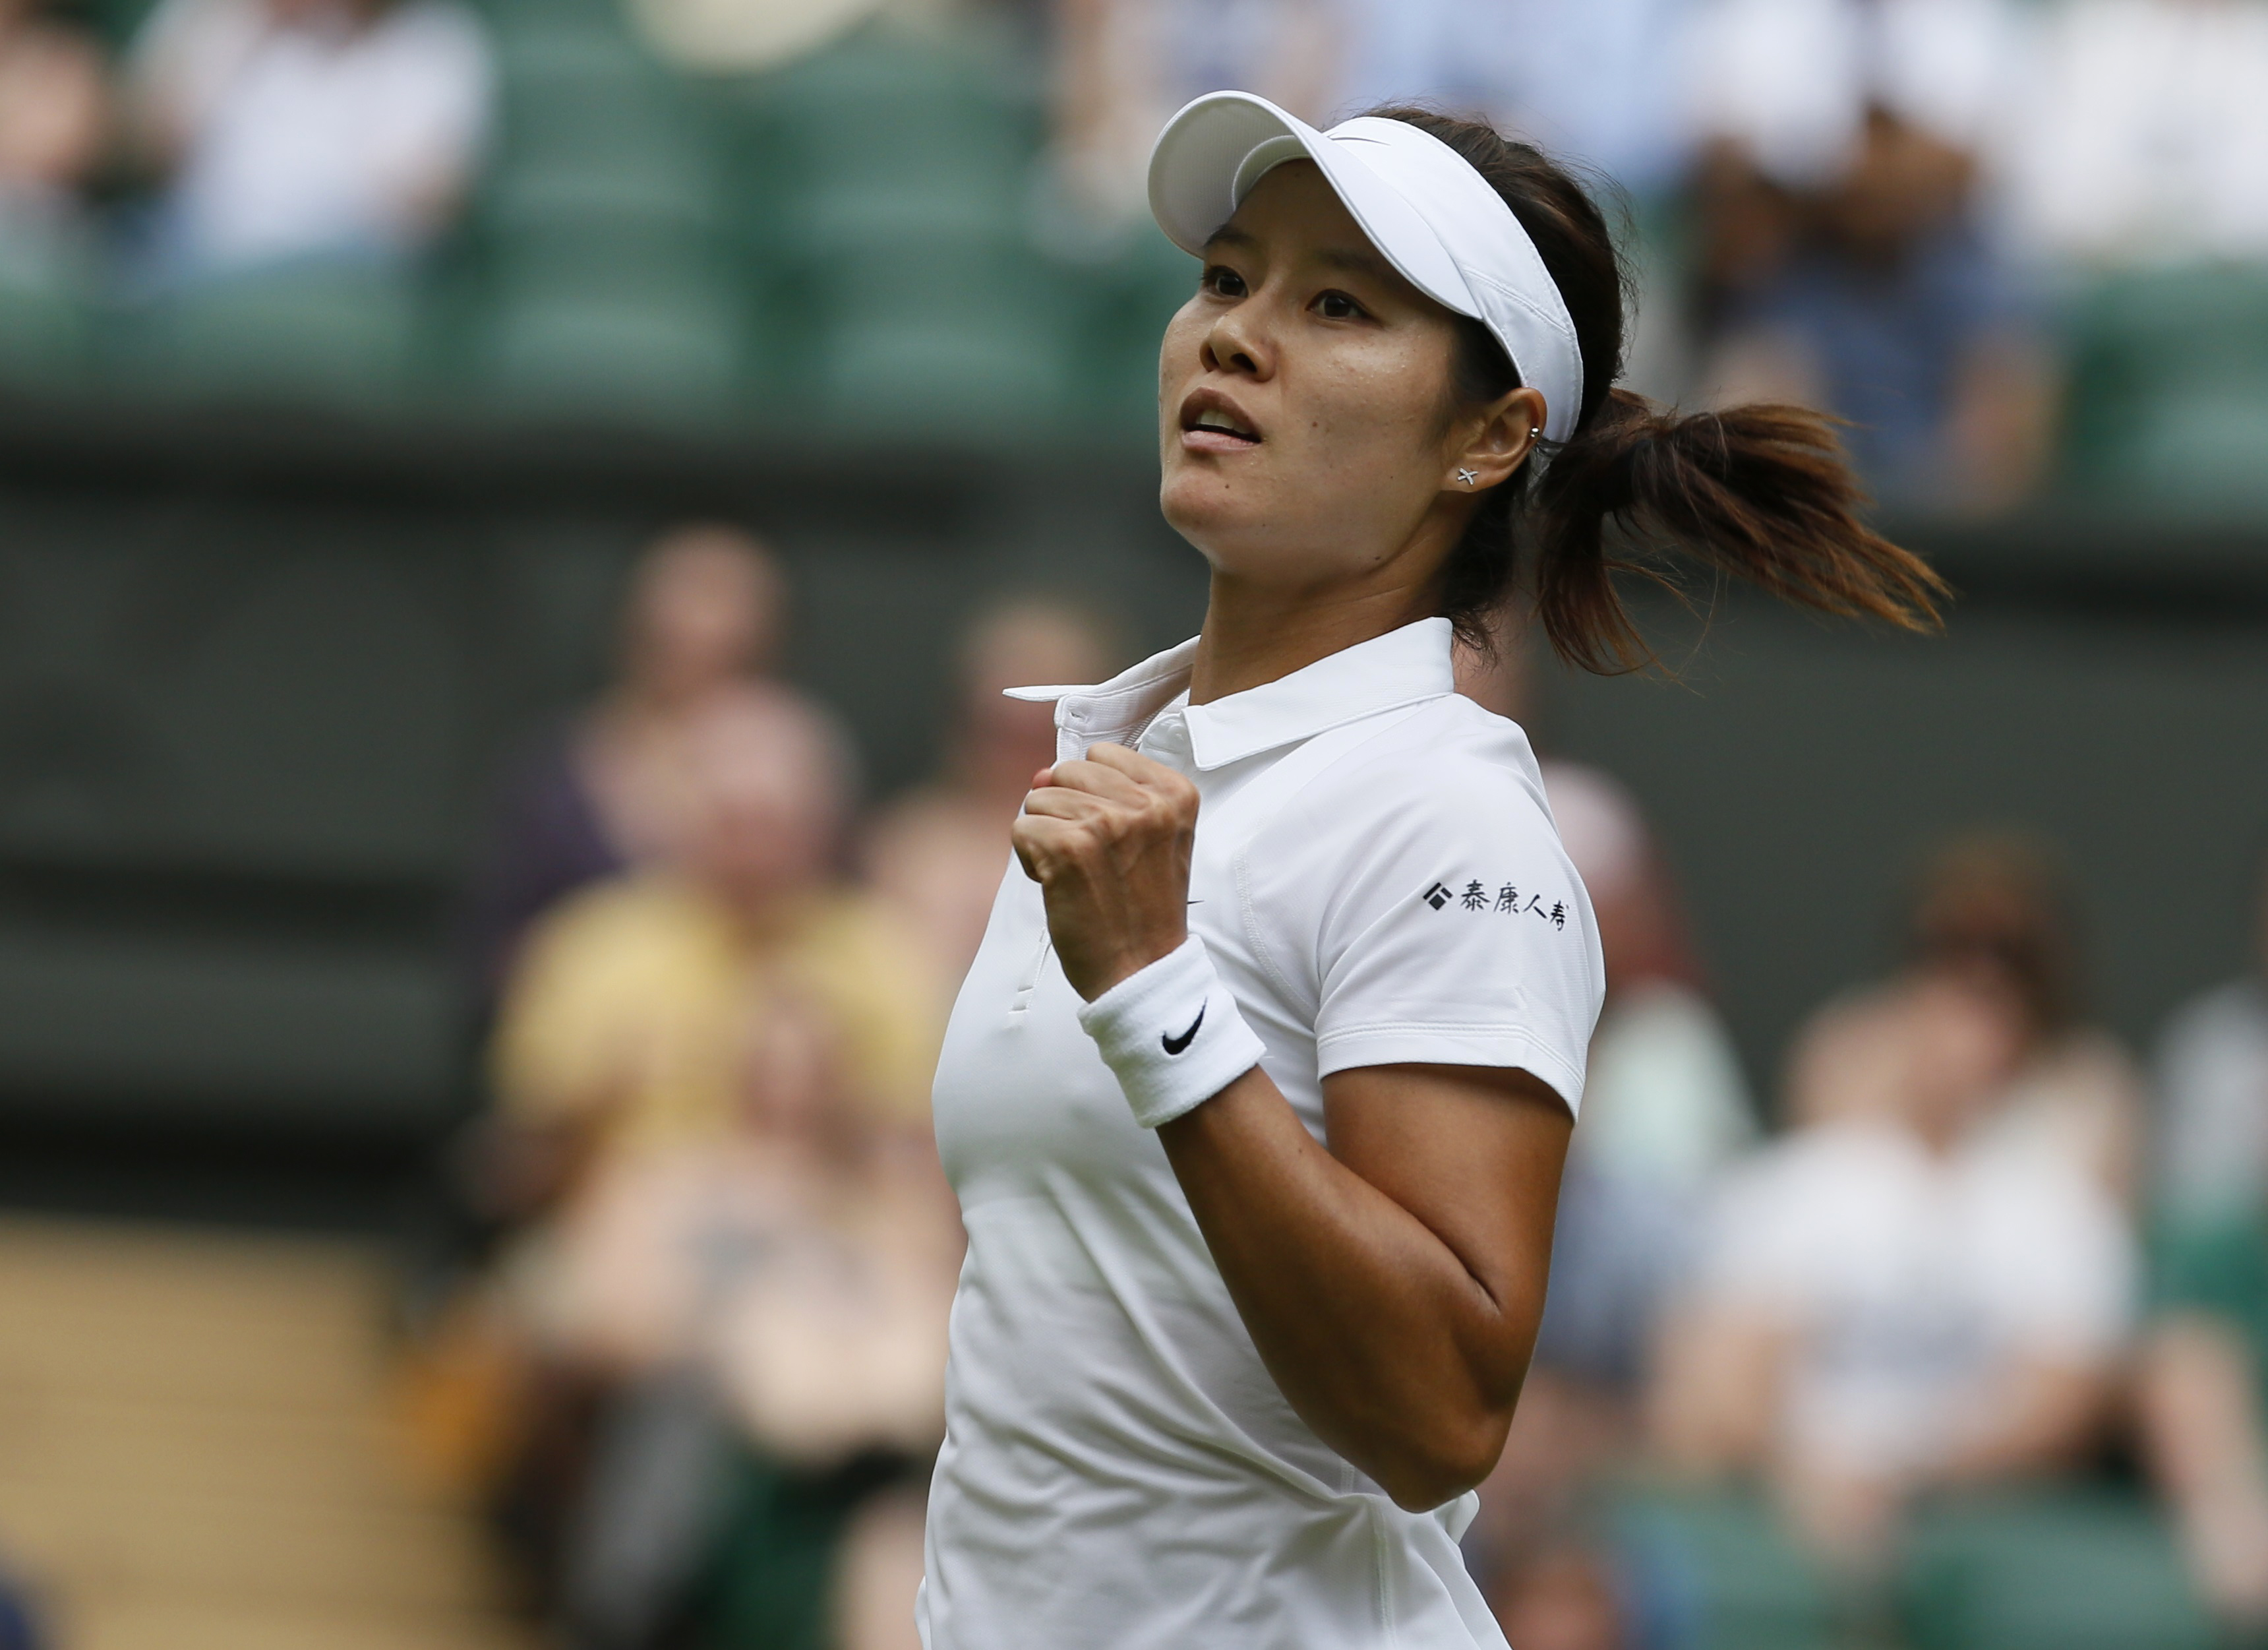 Li Na of China reacts after defeating Paula Kania of Poland in their women's singles tennis match at the Wimbledon Tennis Championships, in London